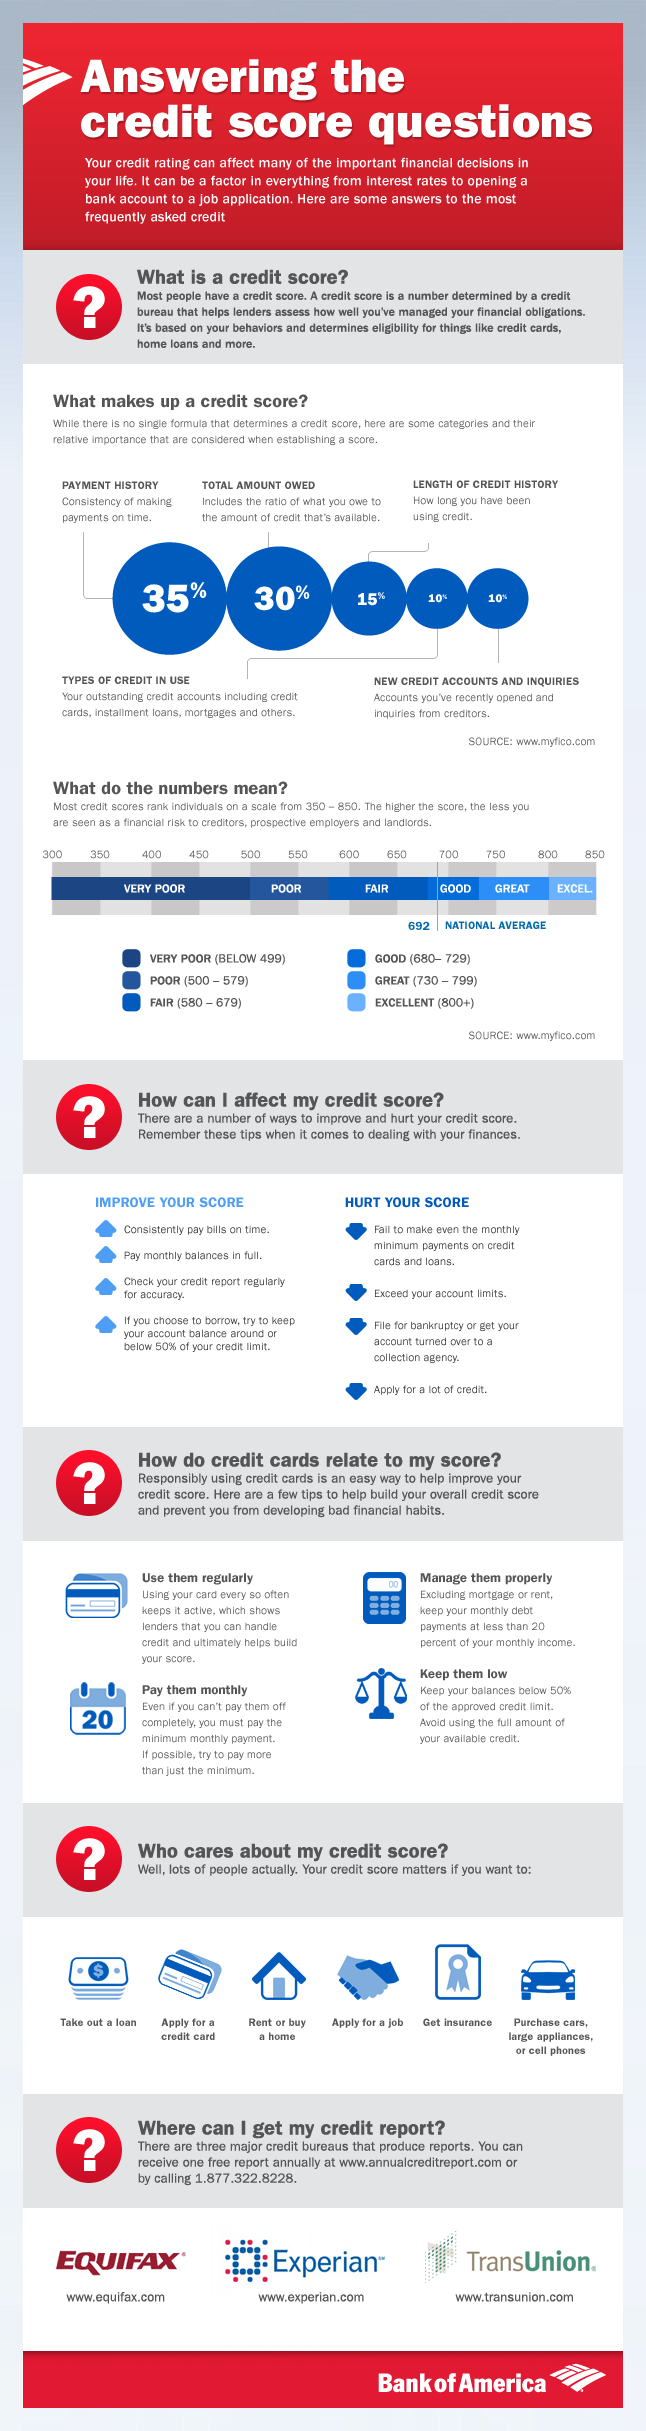 Tips on How to Improve Your Credit Score